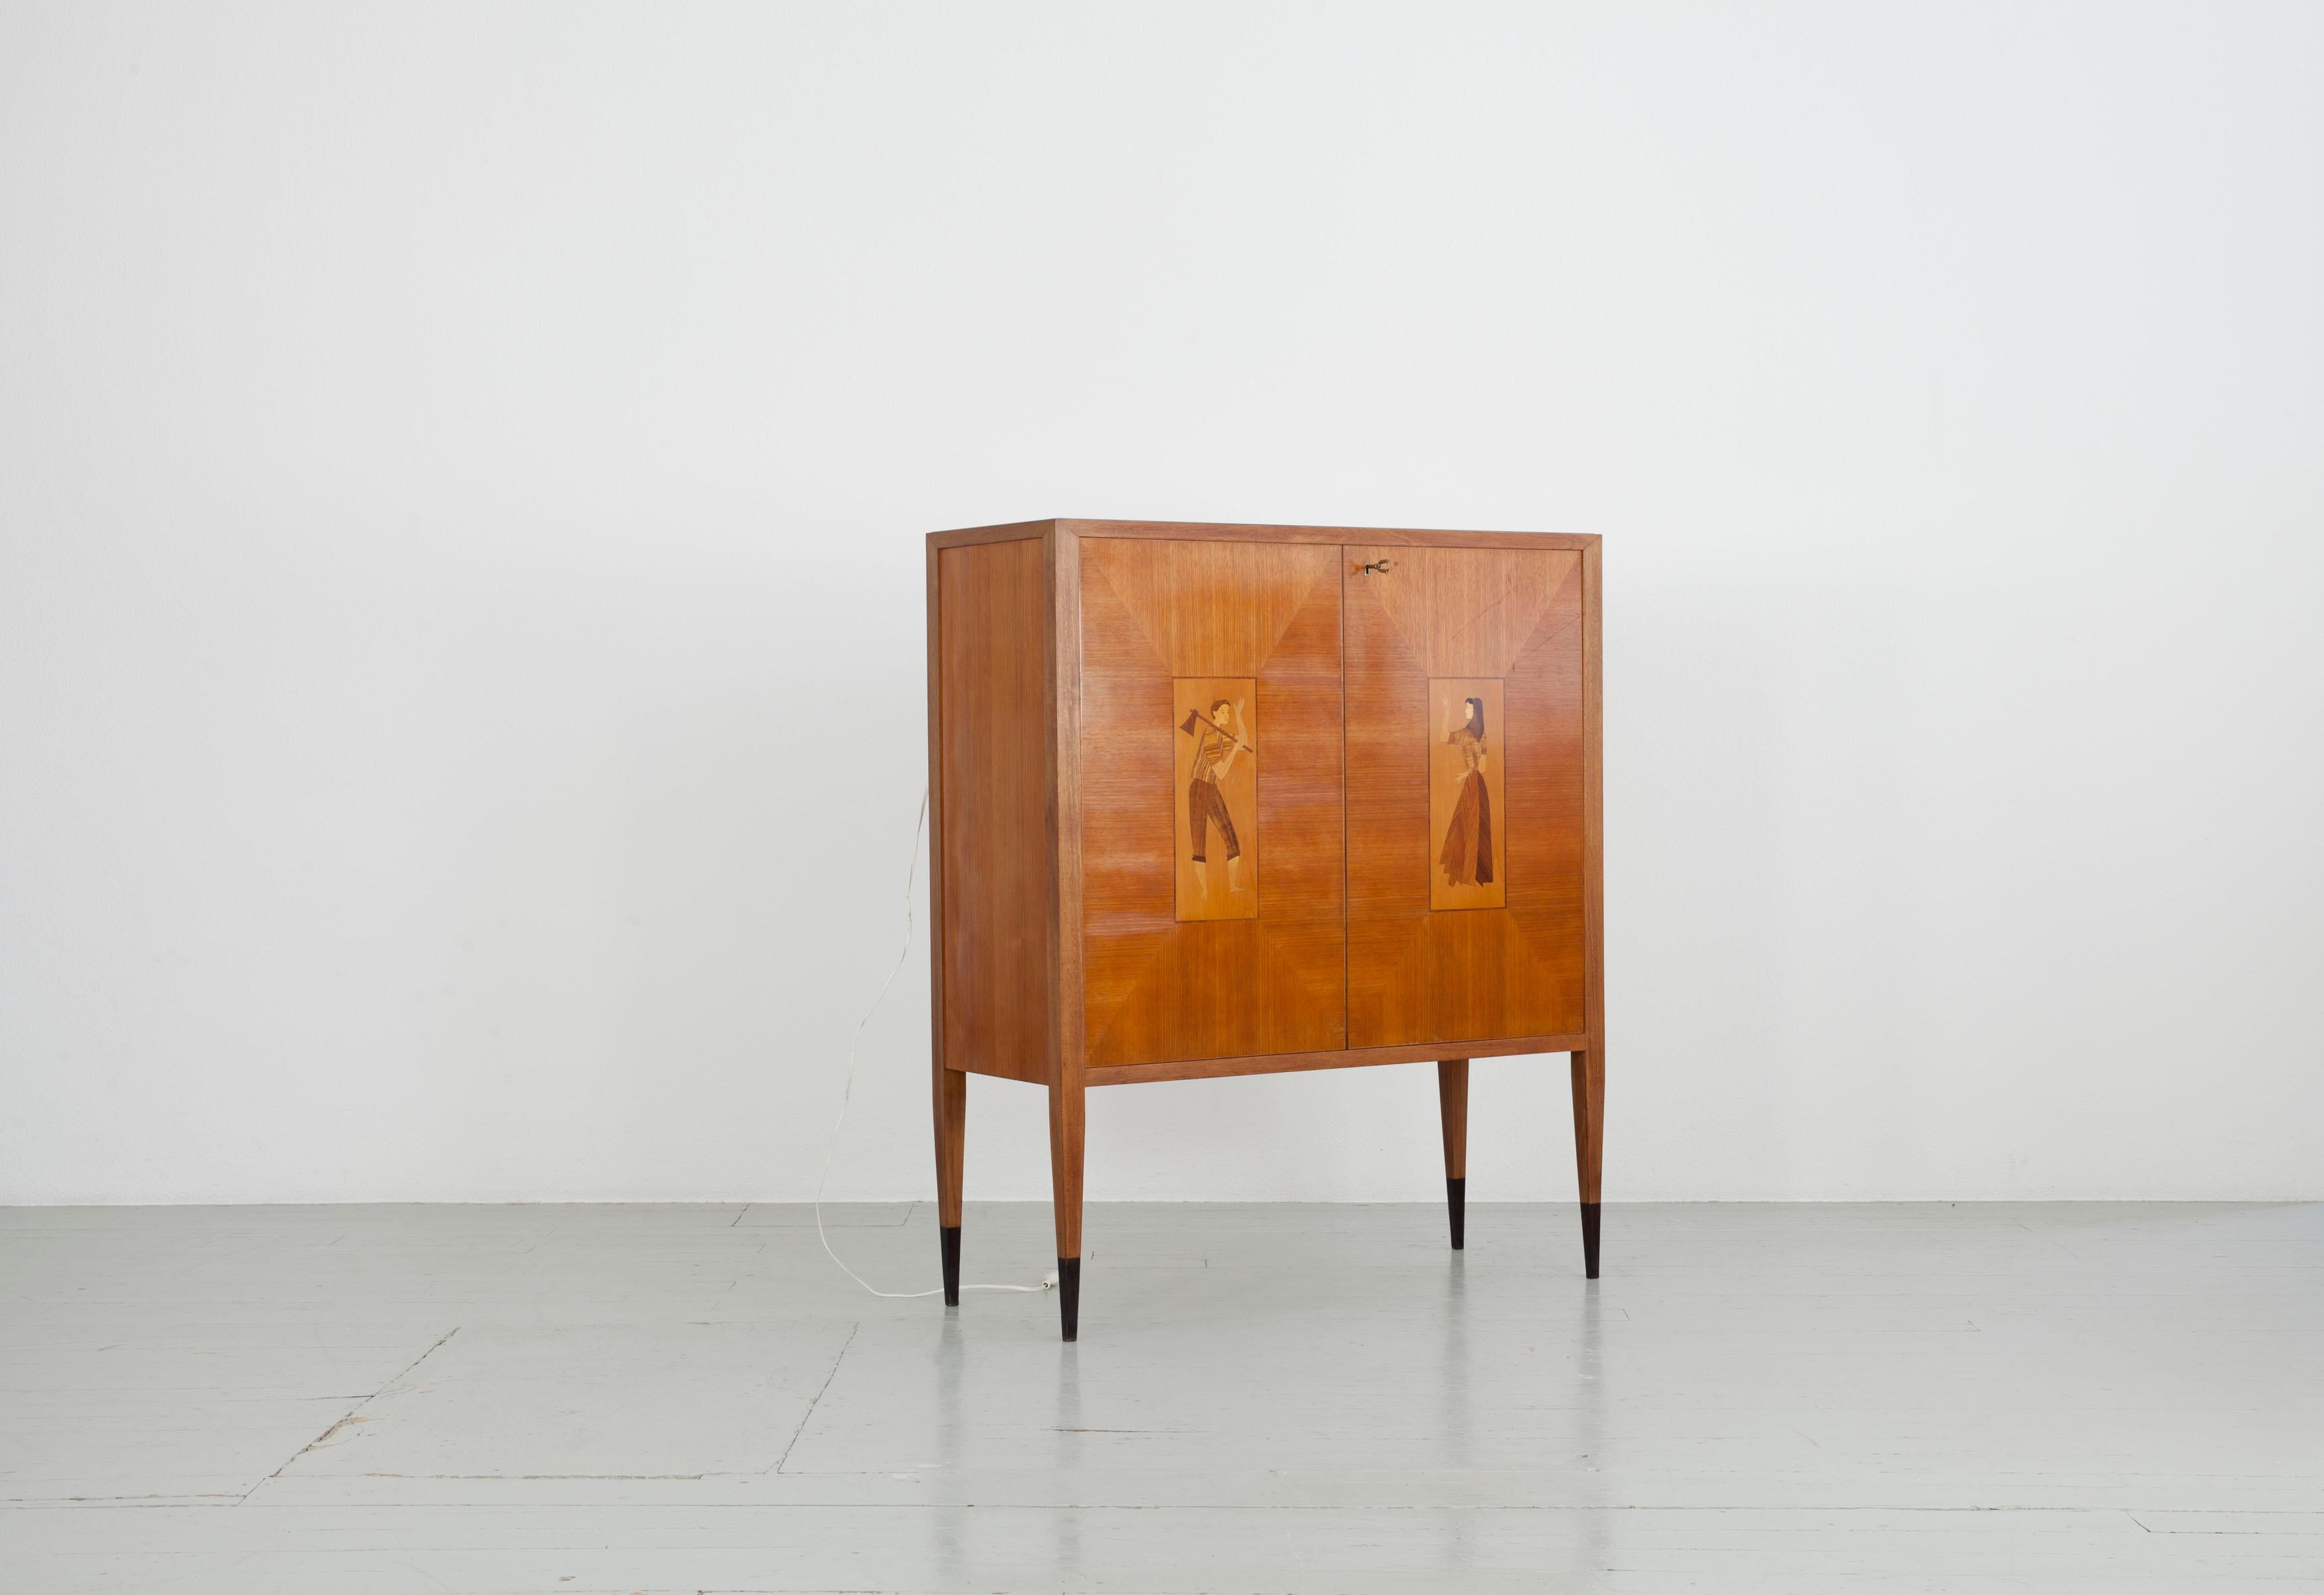 Bar cabinet, Italy, 1950s
Walnut veneer with two inlays of different woods with traditional
figures, inside mirror with lighting. 
Crystal glass with coloured paper applied to the back.